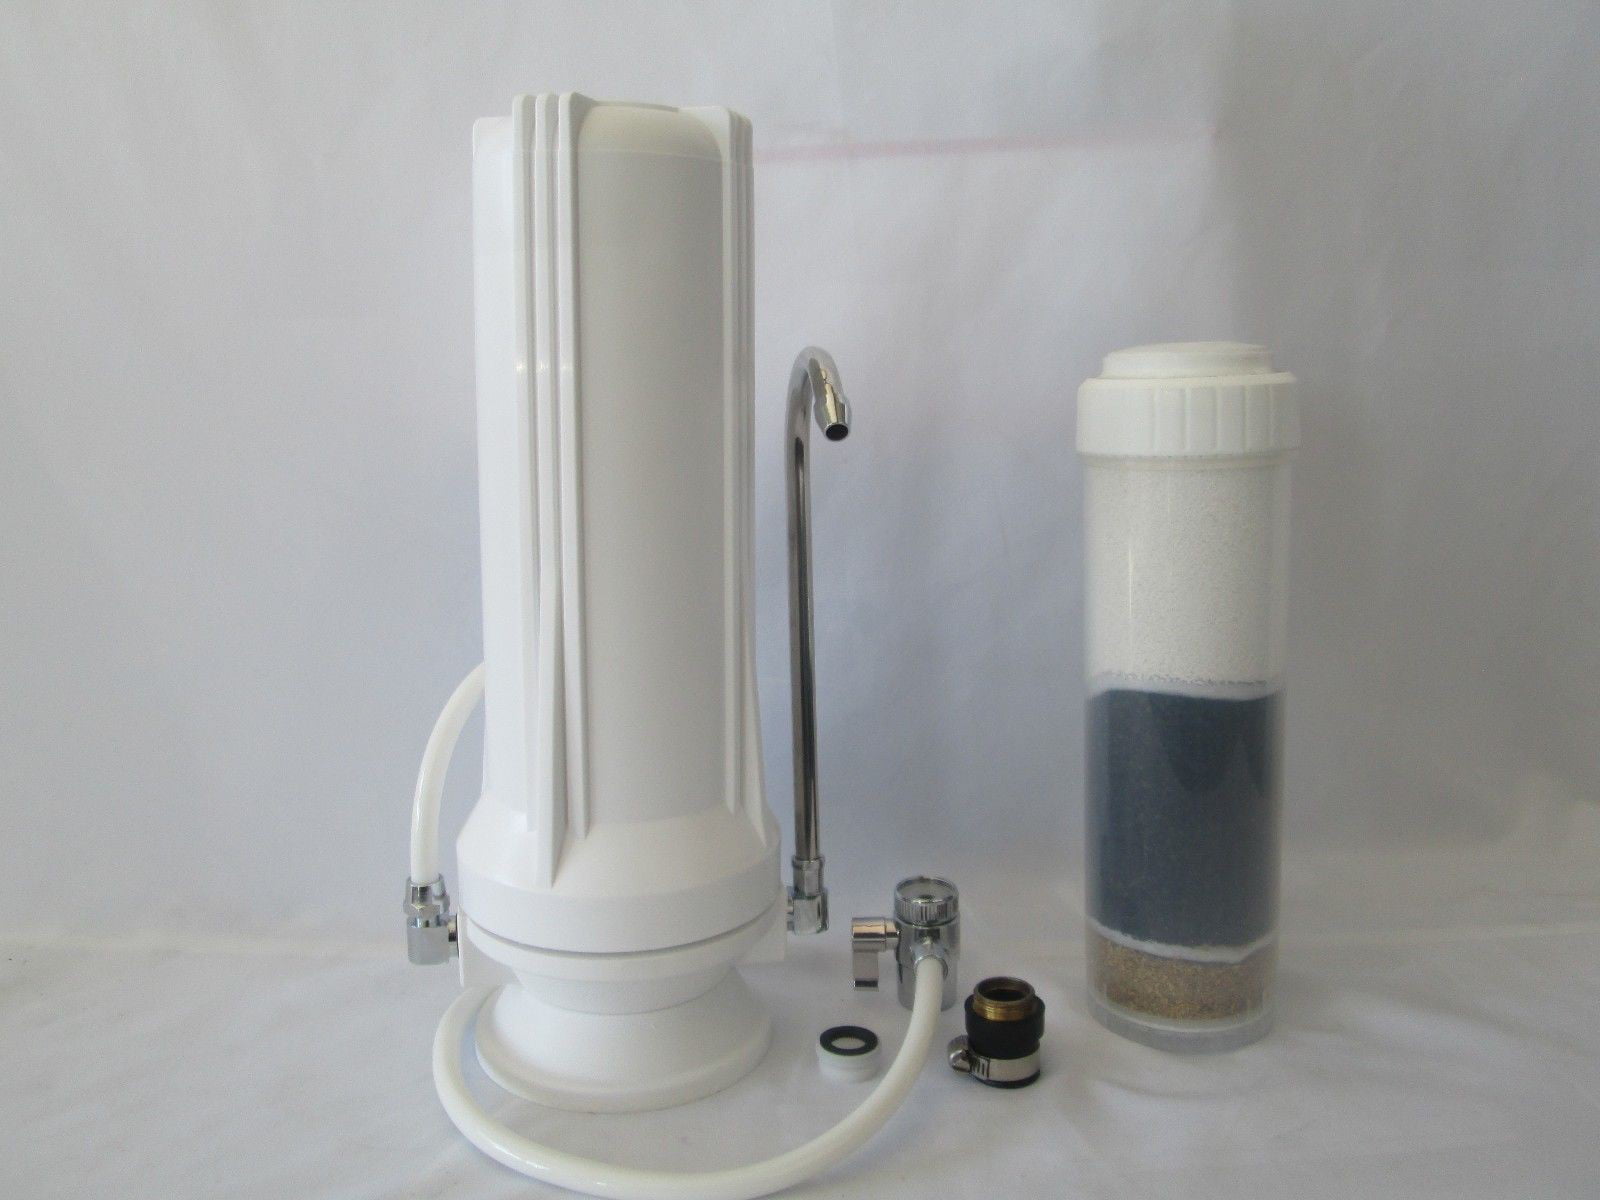 Premier Countertop Water Filter with Fluoride Reduction Multi-Stage Filtration Made in USA 